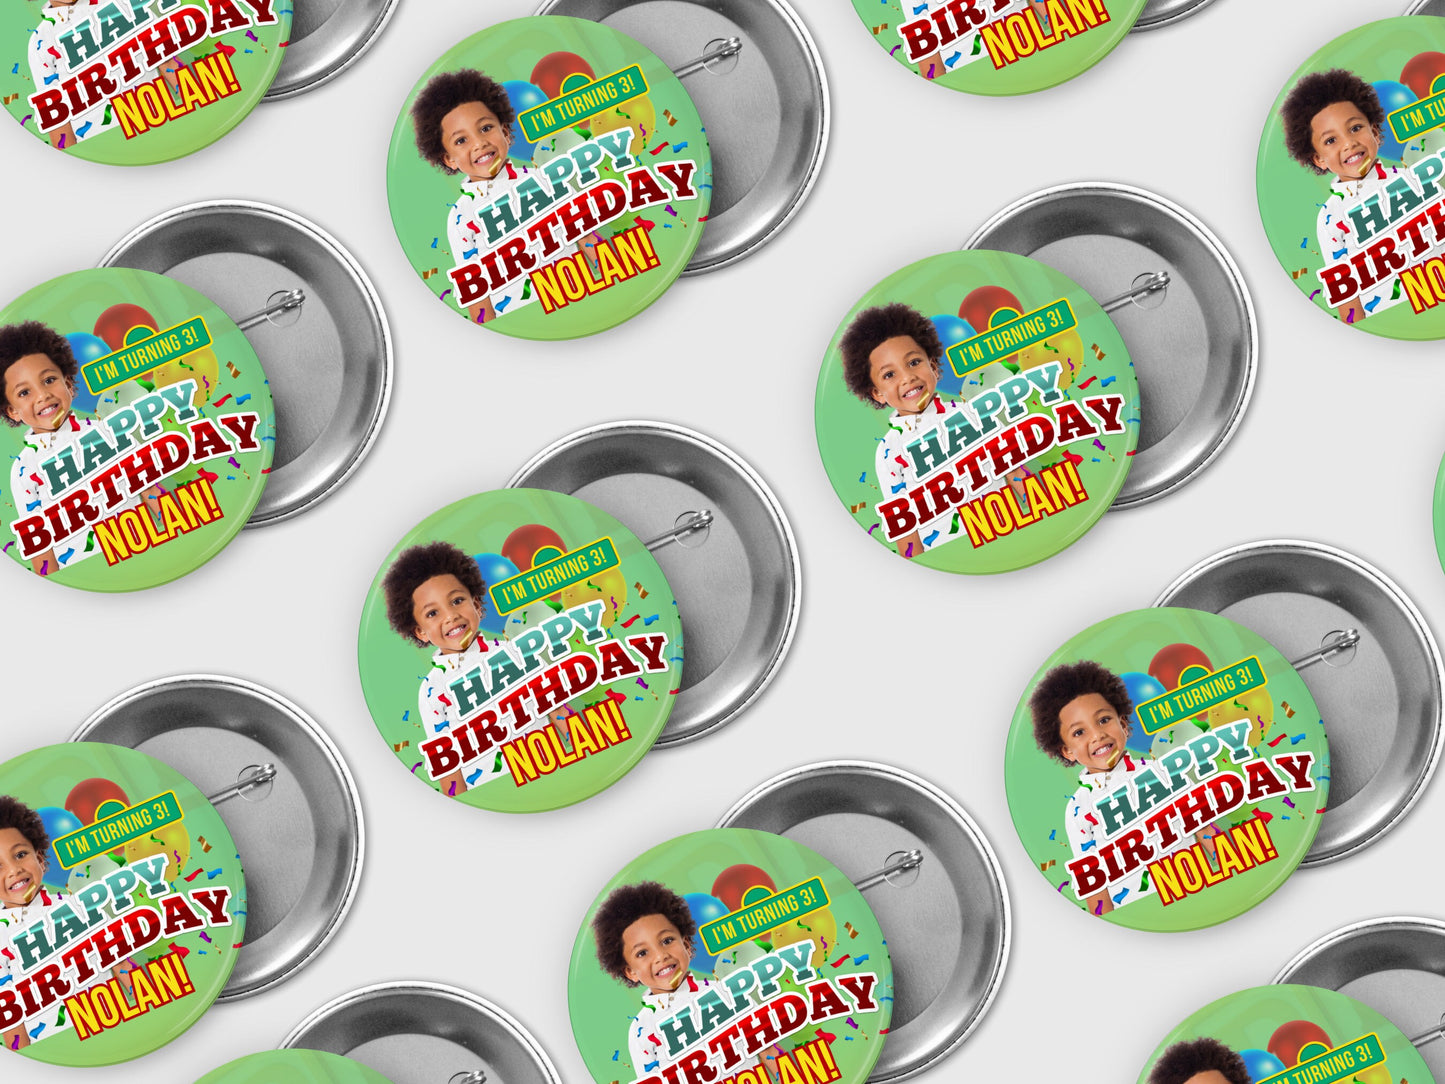 GREEN BIRTHDAY PINBACK Template,Full Color| Personalized Funeral Buttons|Pinback Button Template|Keepsake Pin Backs Template